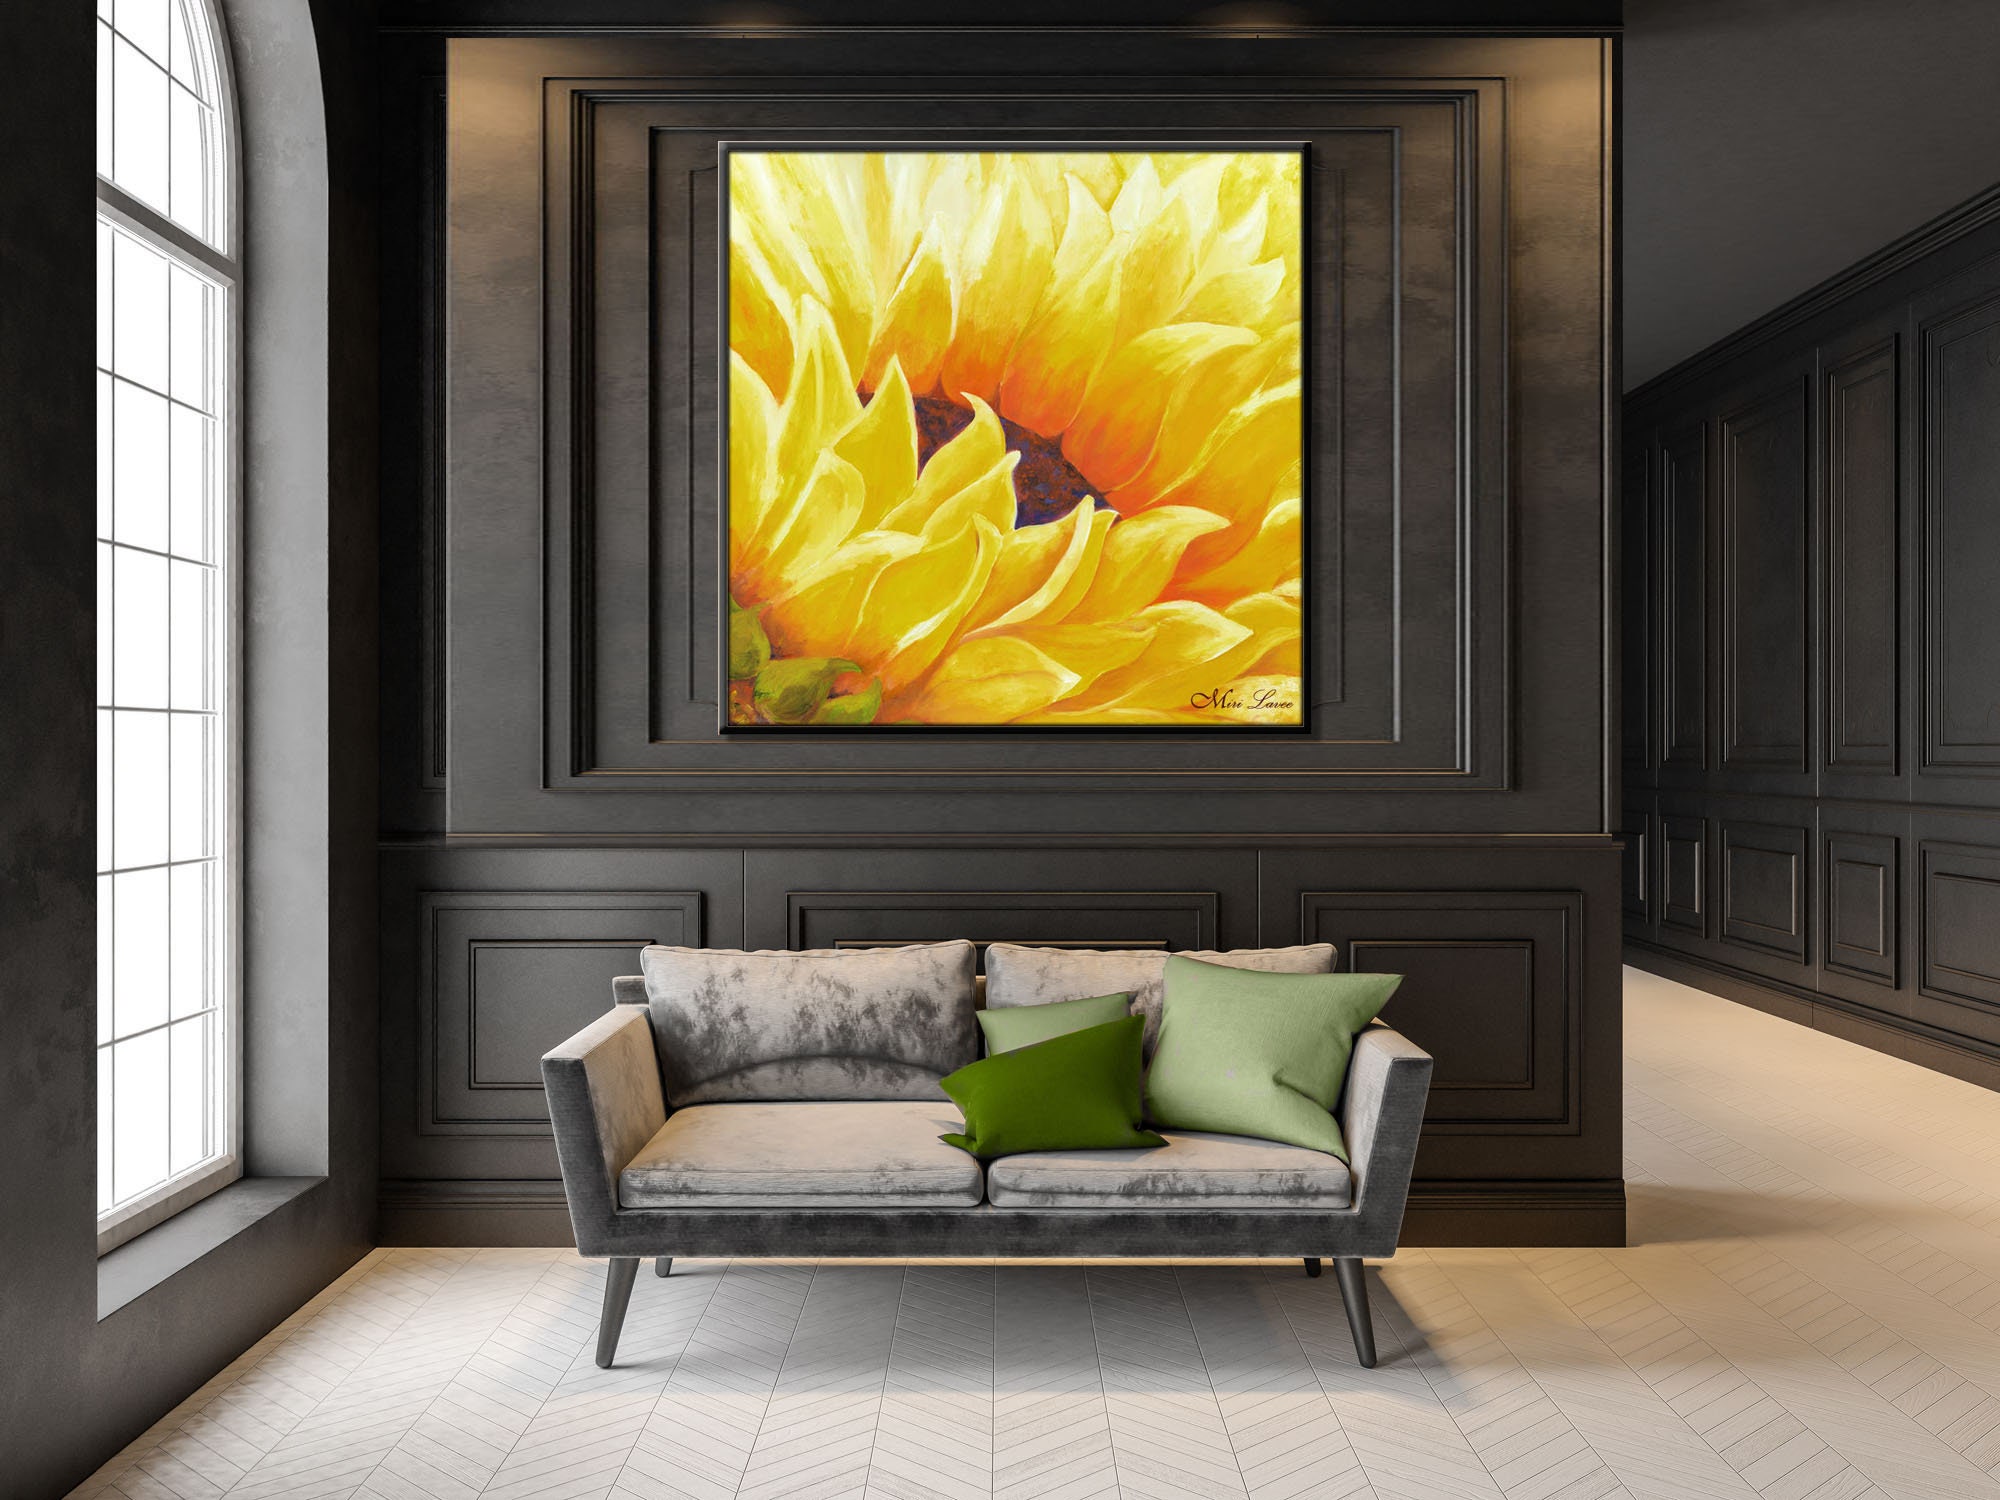  Framed Canvas Wall Art Daisy Flower Pattern Oil Painting  Artwork Picture Posters Wall Decor for Living Room Bedroom Bathroom Office  Home Decoration 20x20 in: Posters & Prints